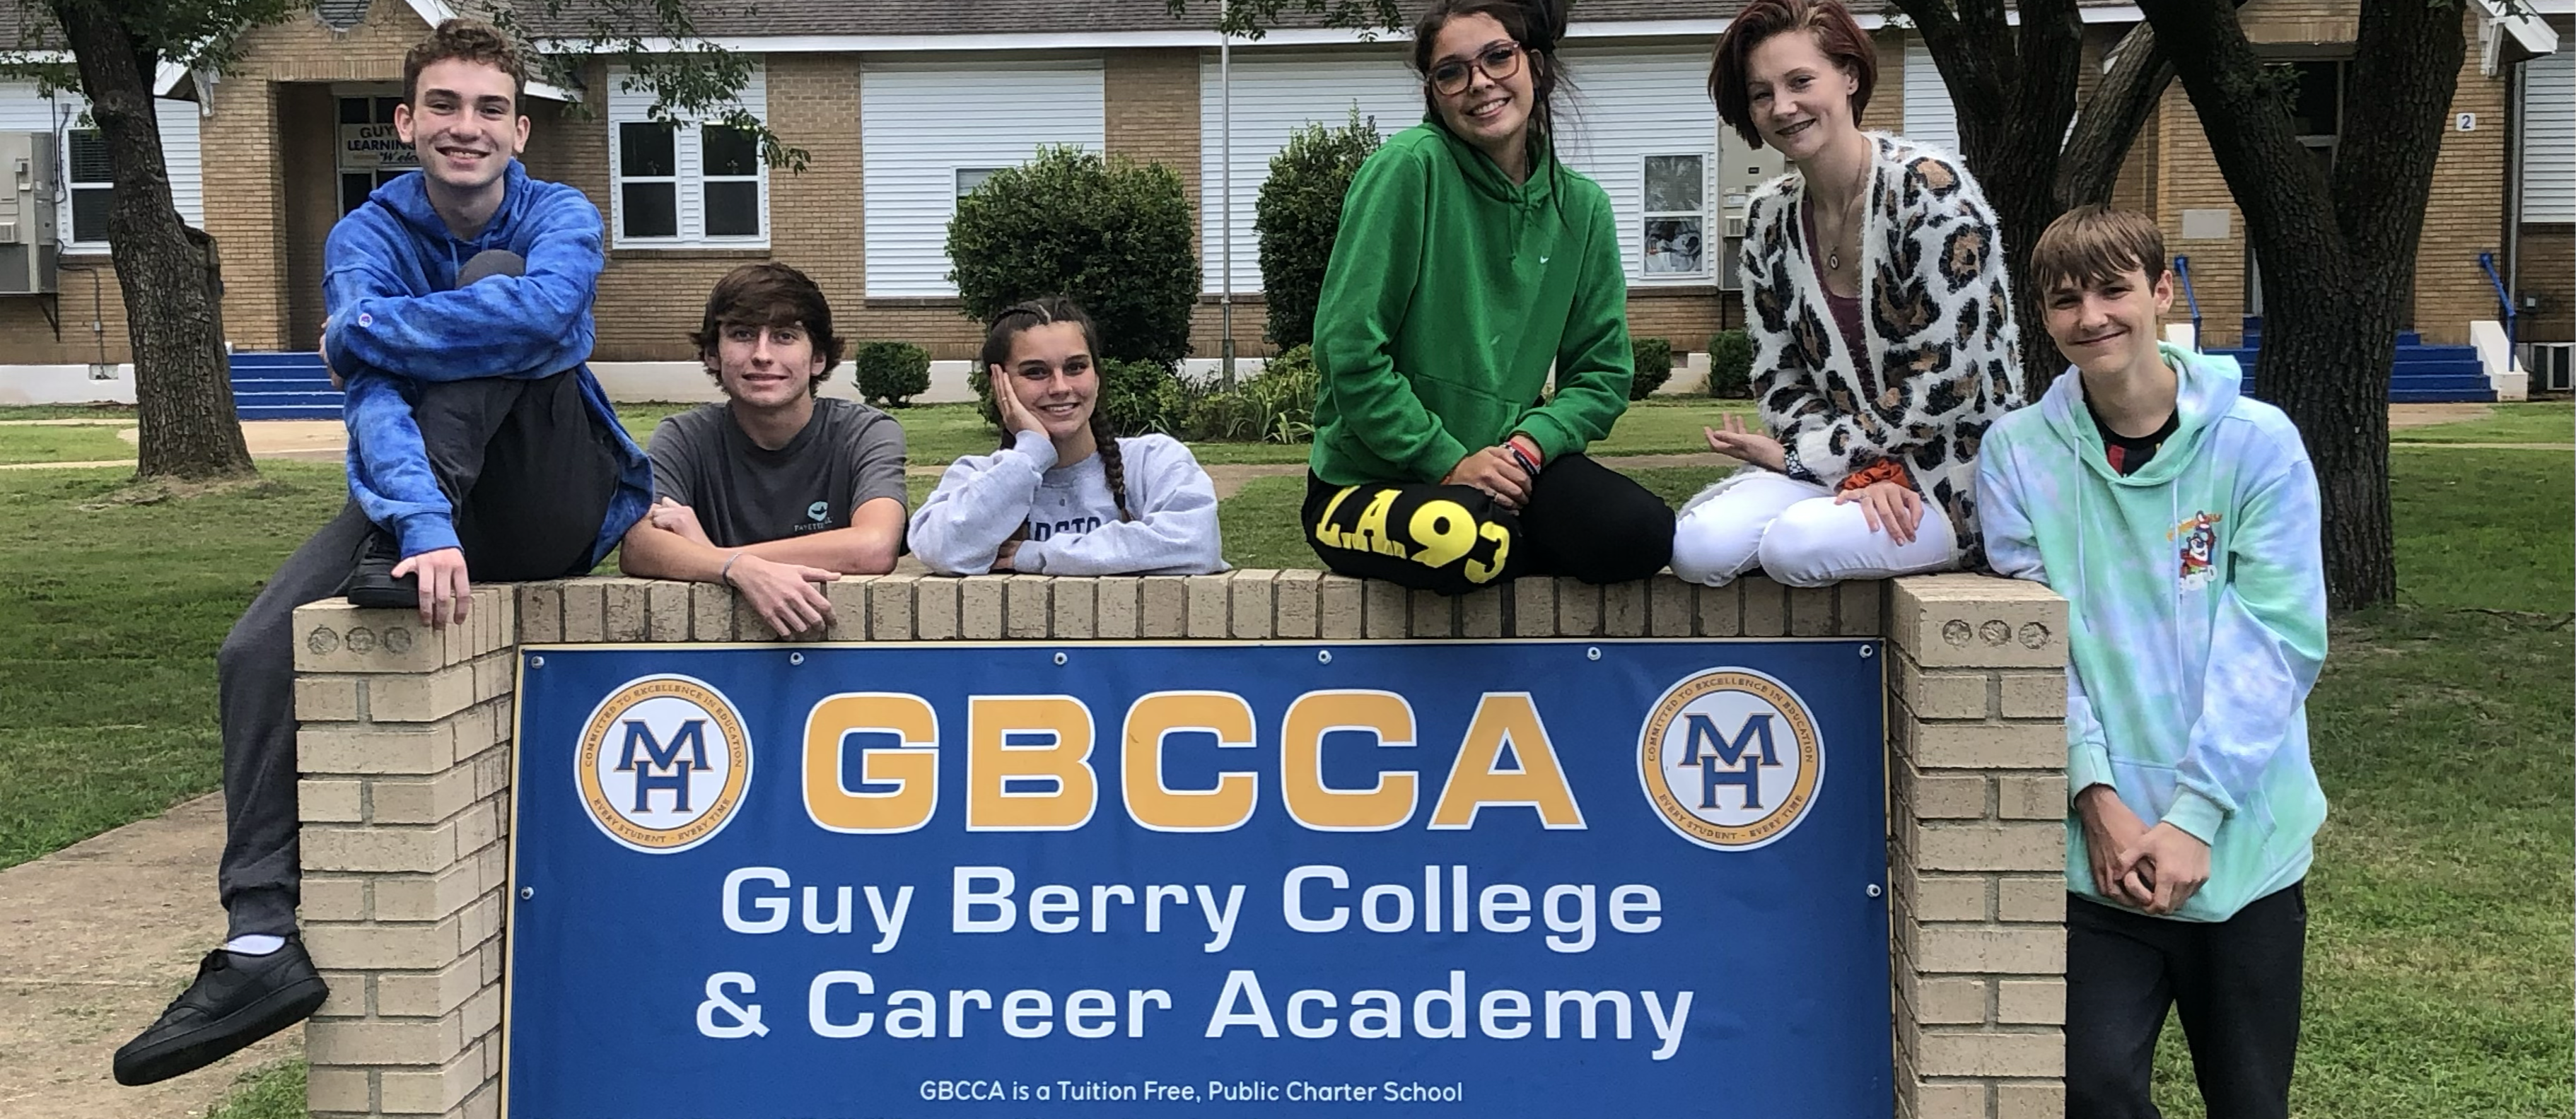 kids standing in front of new GBCCA sign